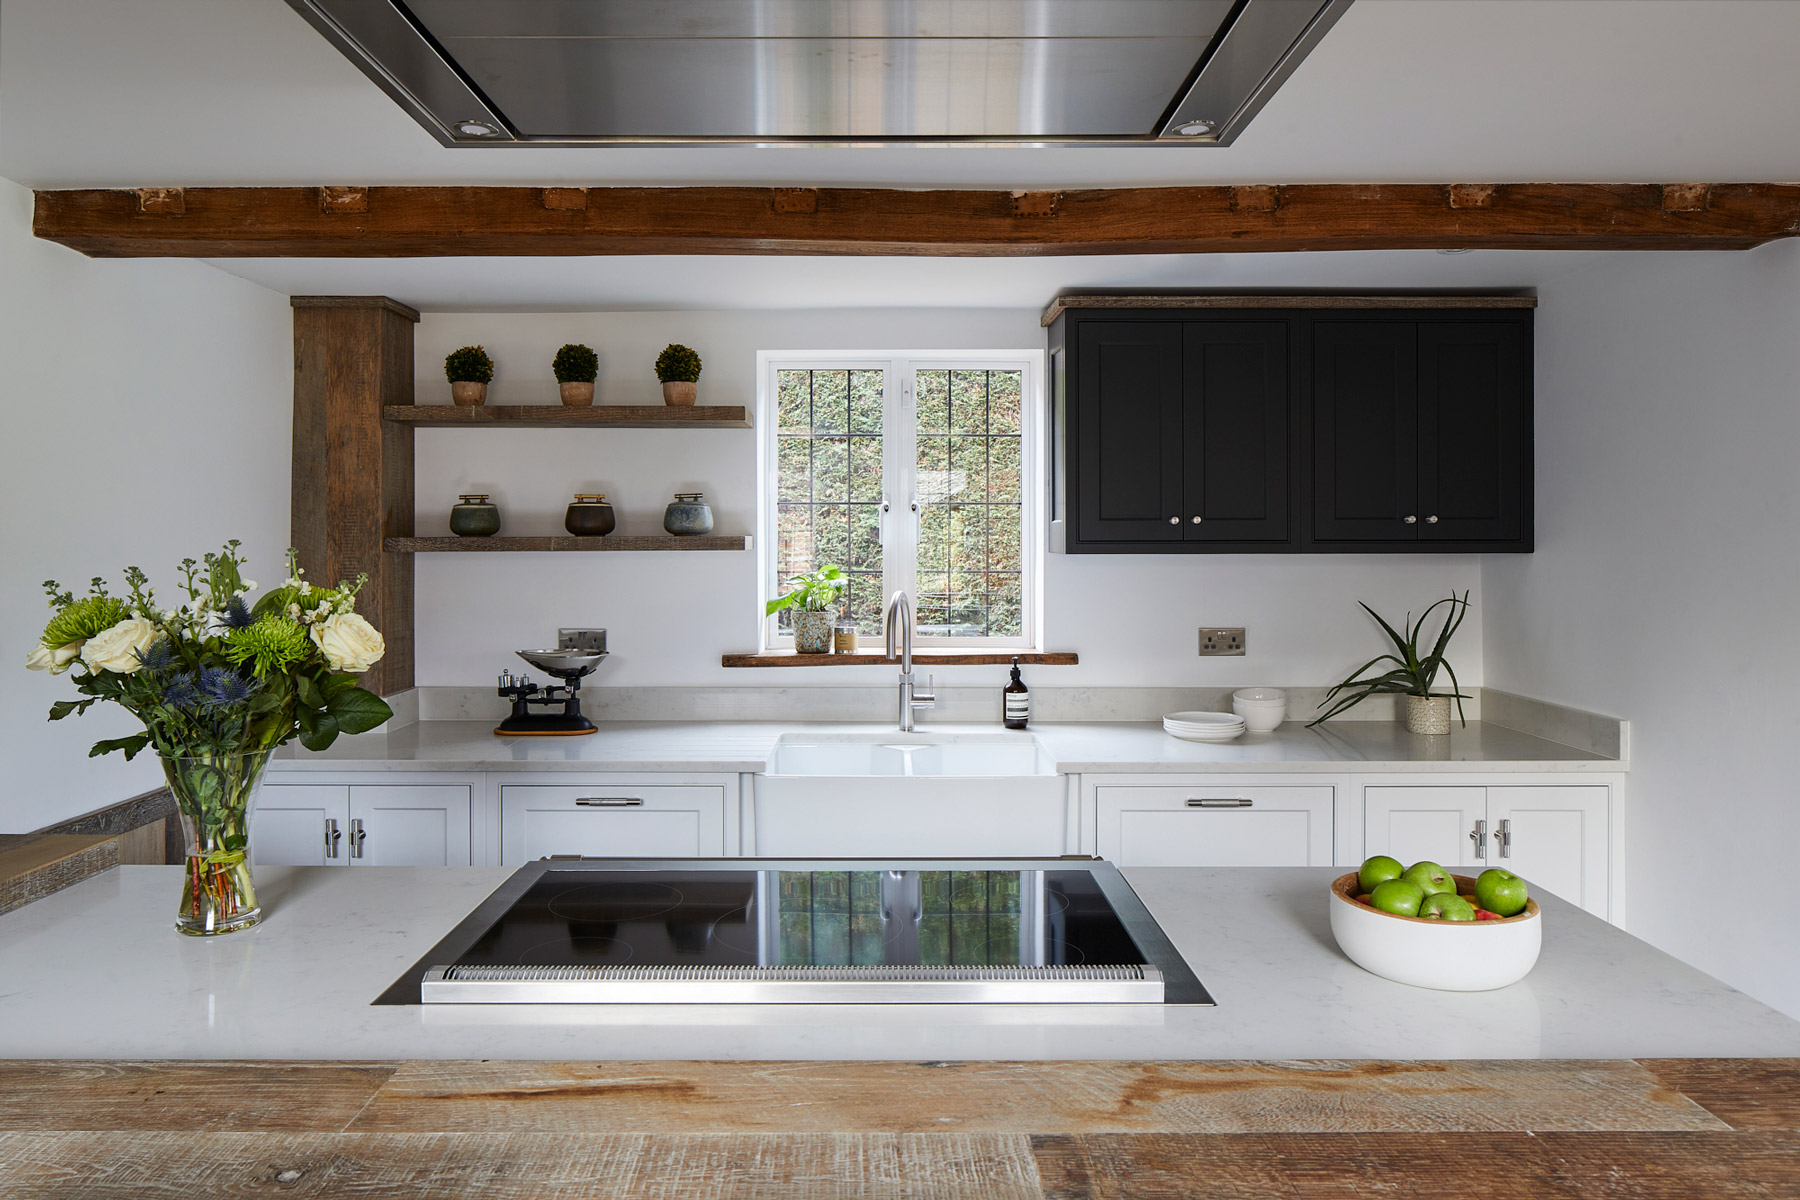 Bespoke painted kitchen with open shelves and dark wall cabinet on sink run